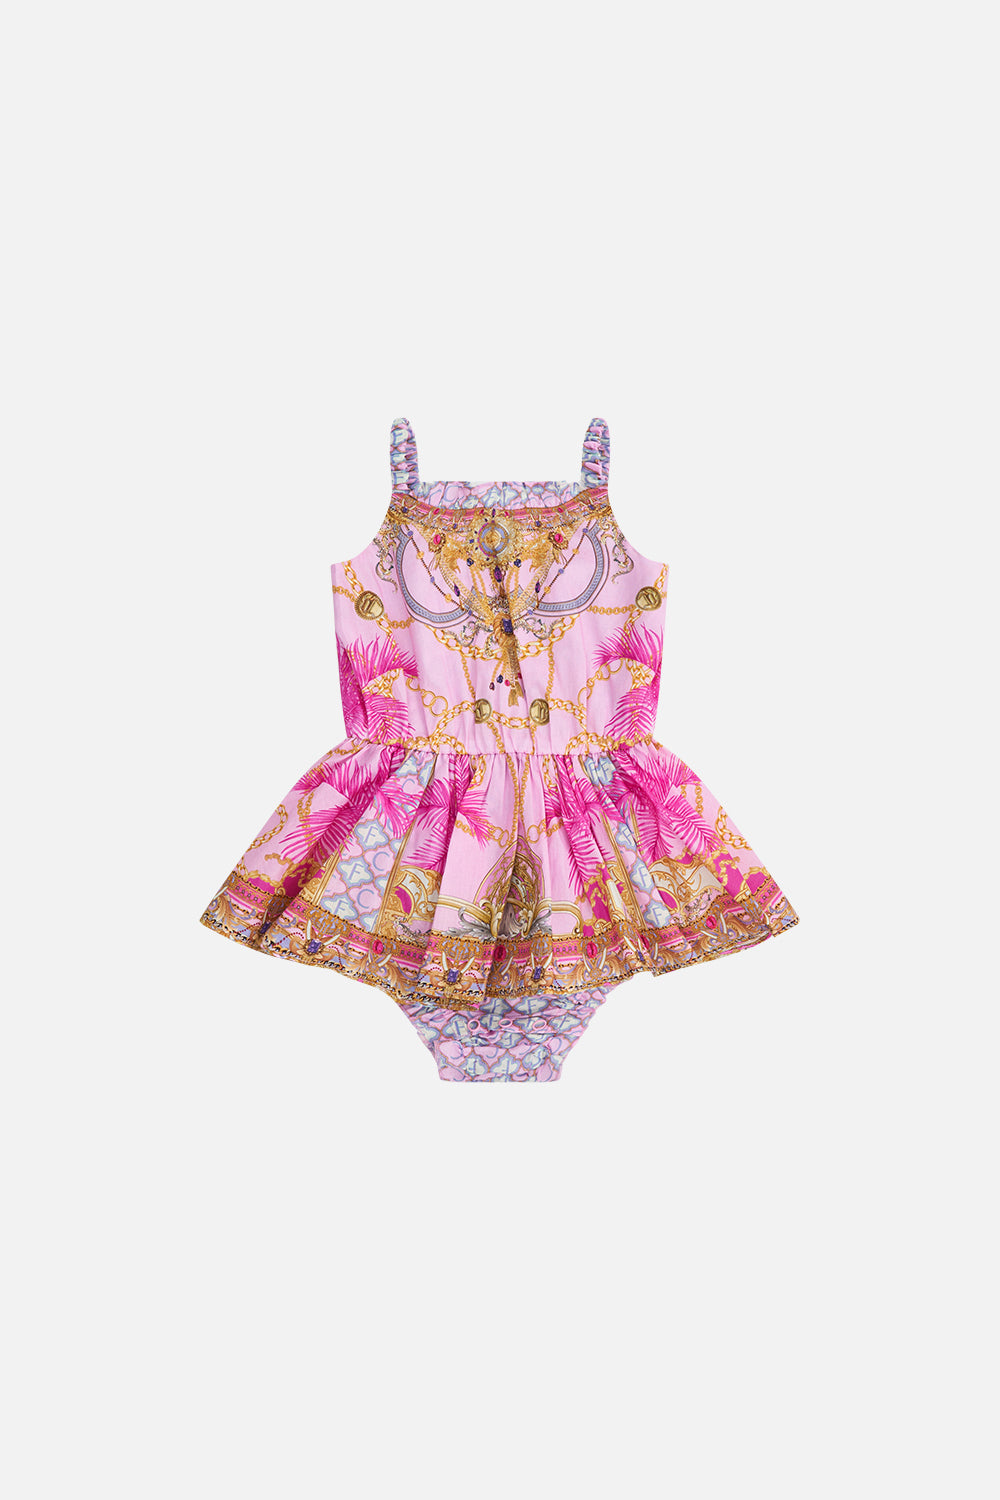 Product view of MILLA By CAMILLA babies jumpdress in  p[ink Tiptoe The Tightrope print